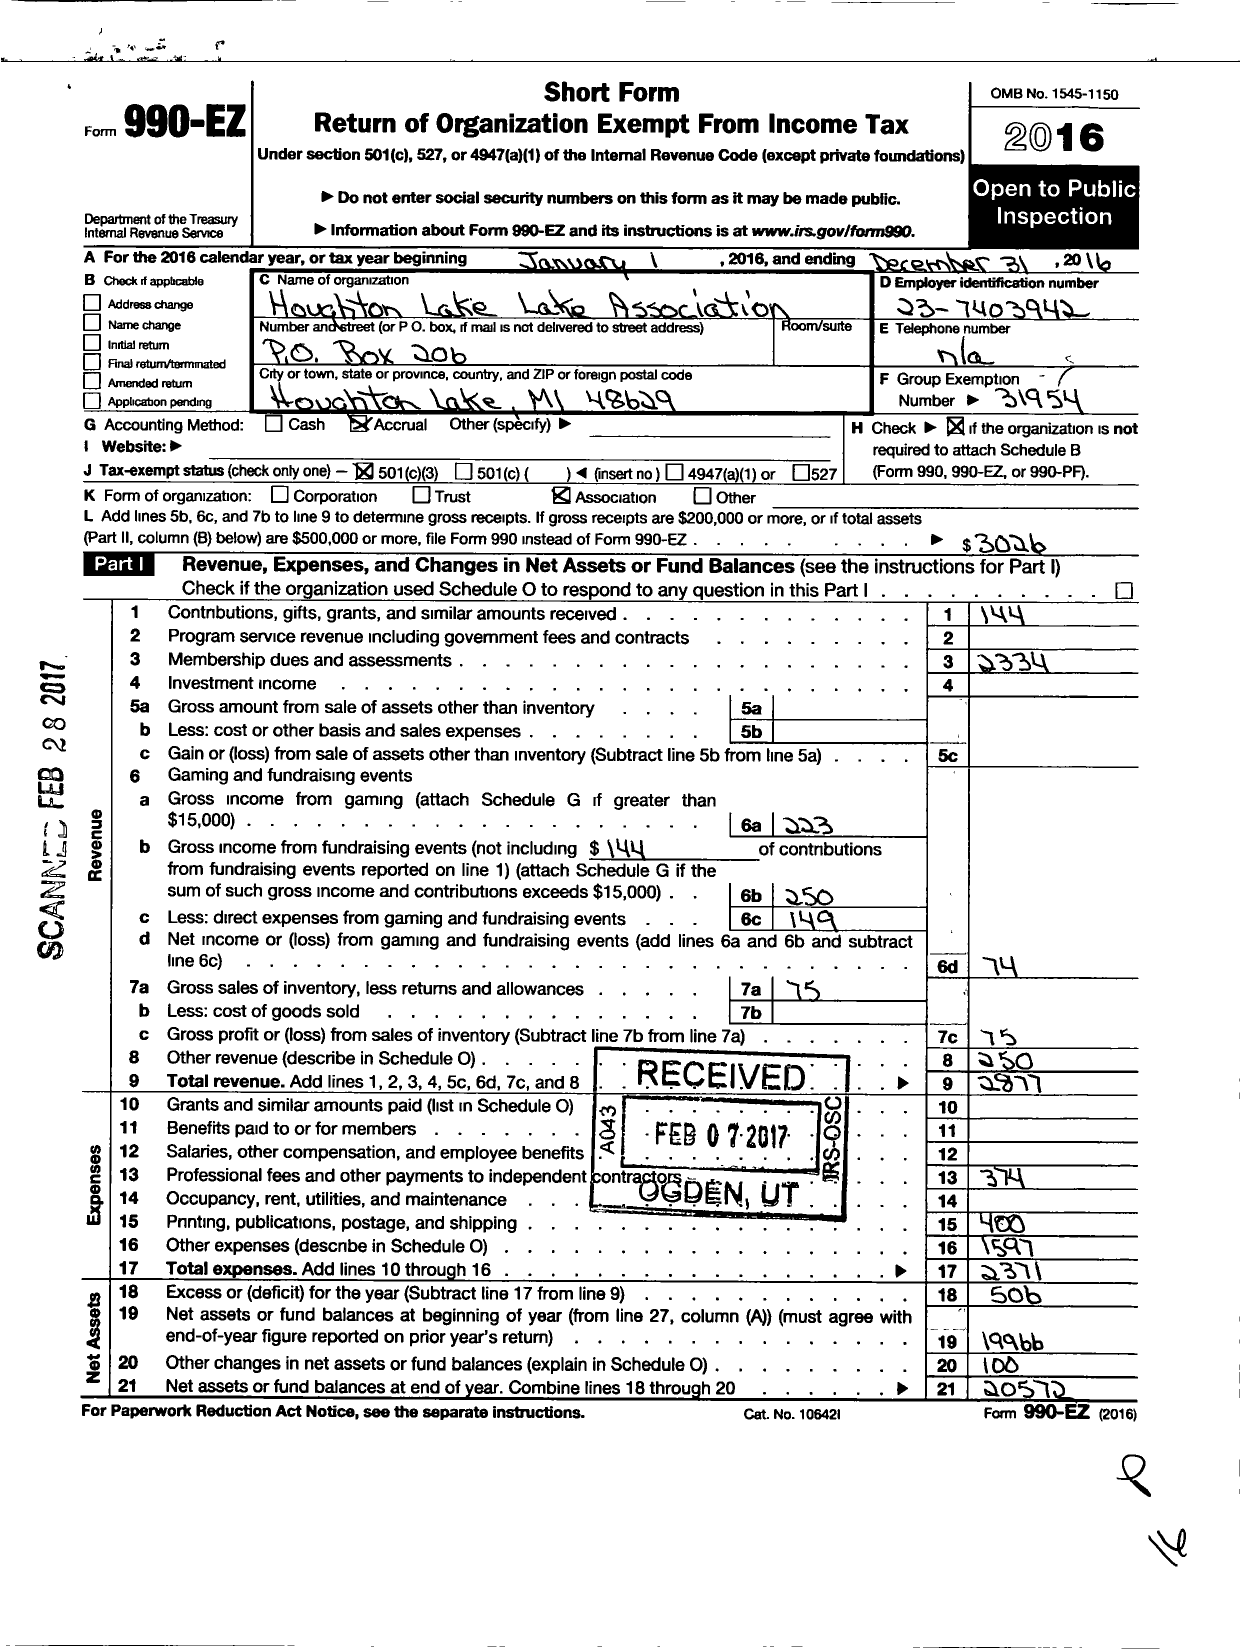 Image of first page of 2016 Form 990EZ for Houghton Lake Lake Association